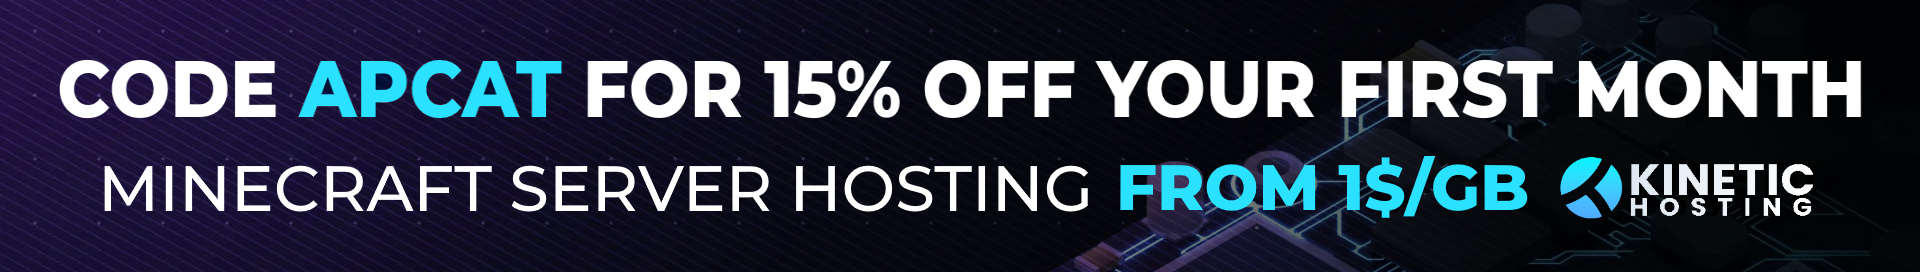 Use code APCAT for 15% off your first month of Kinetic Hosting.